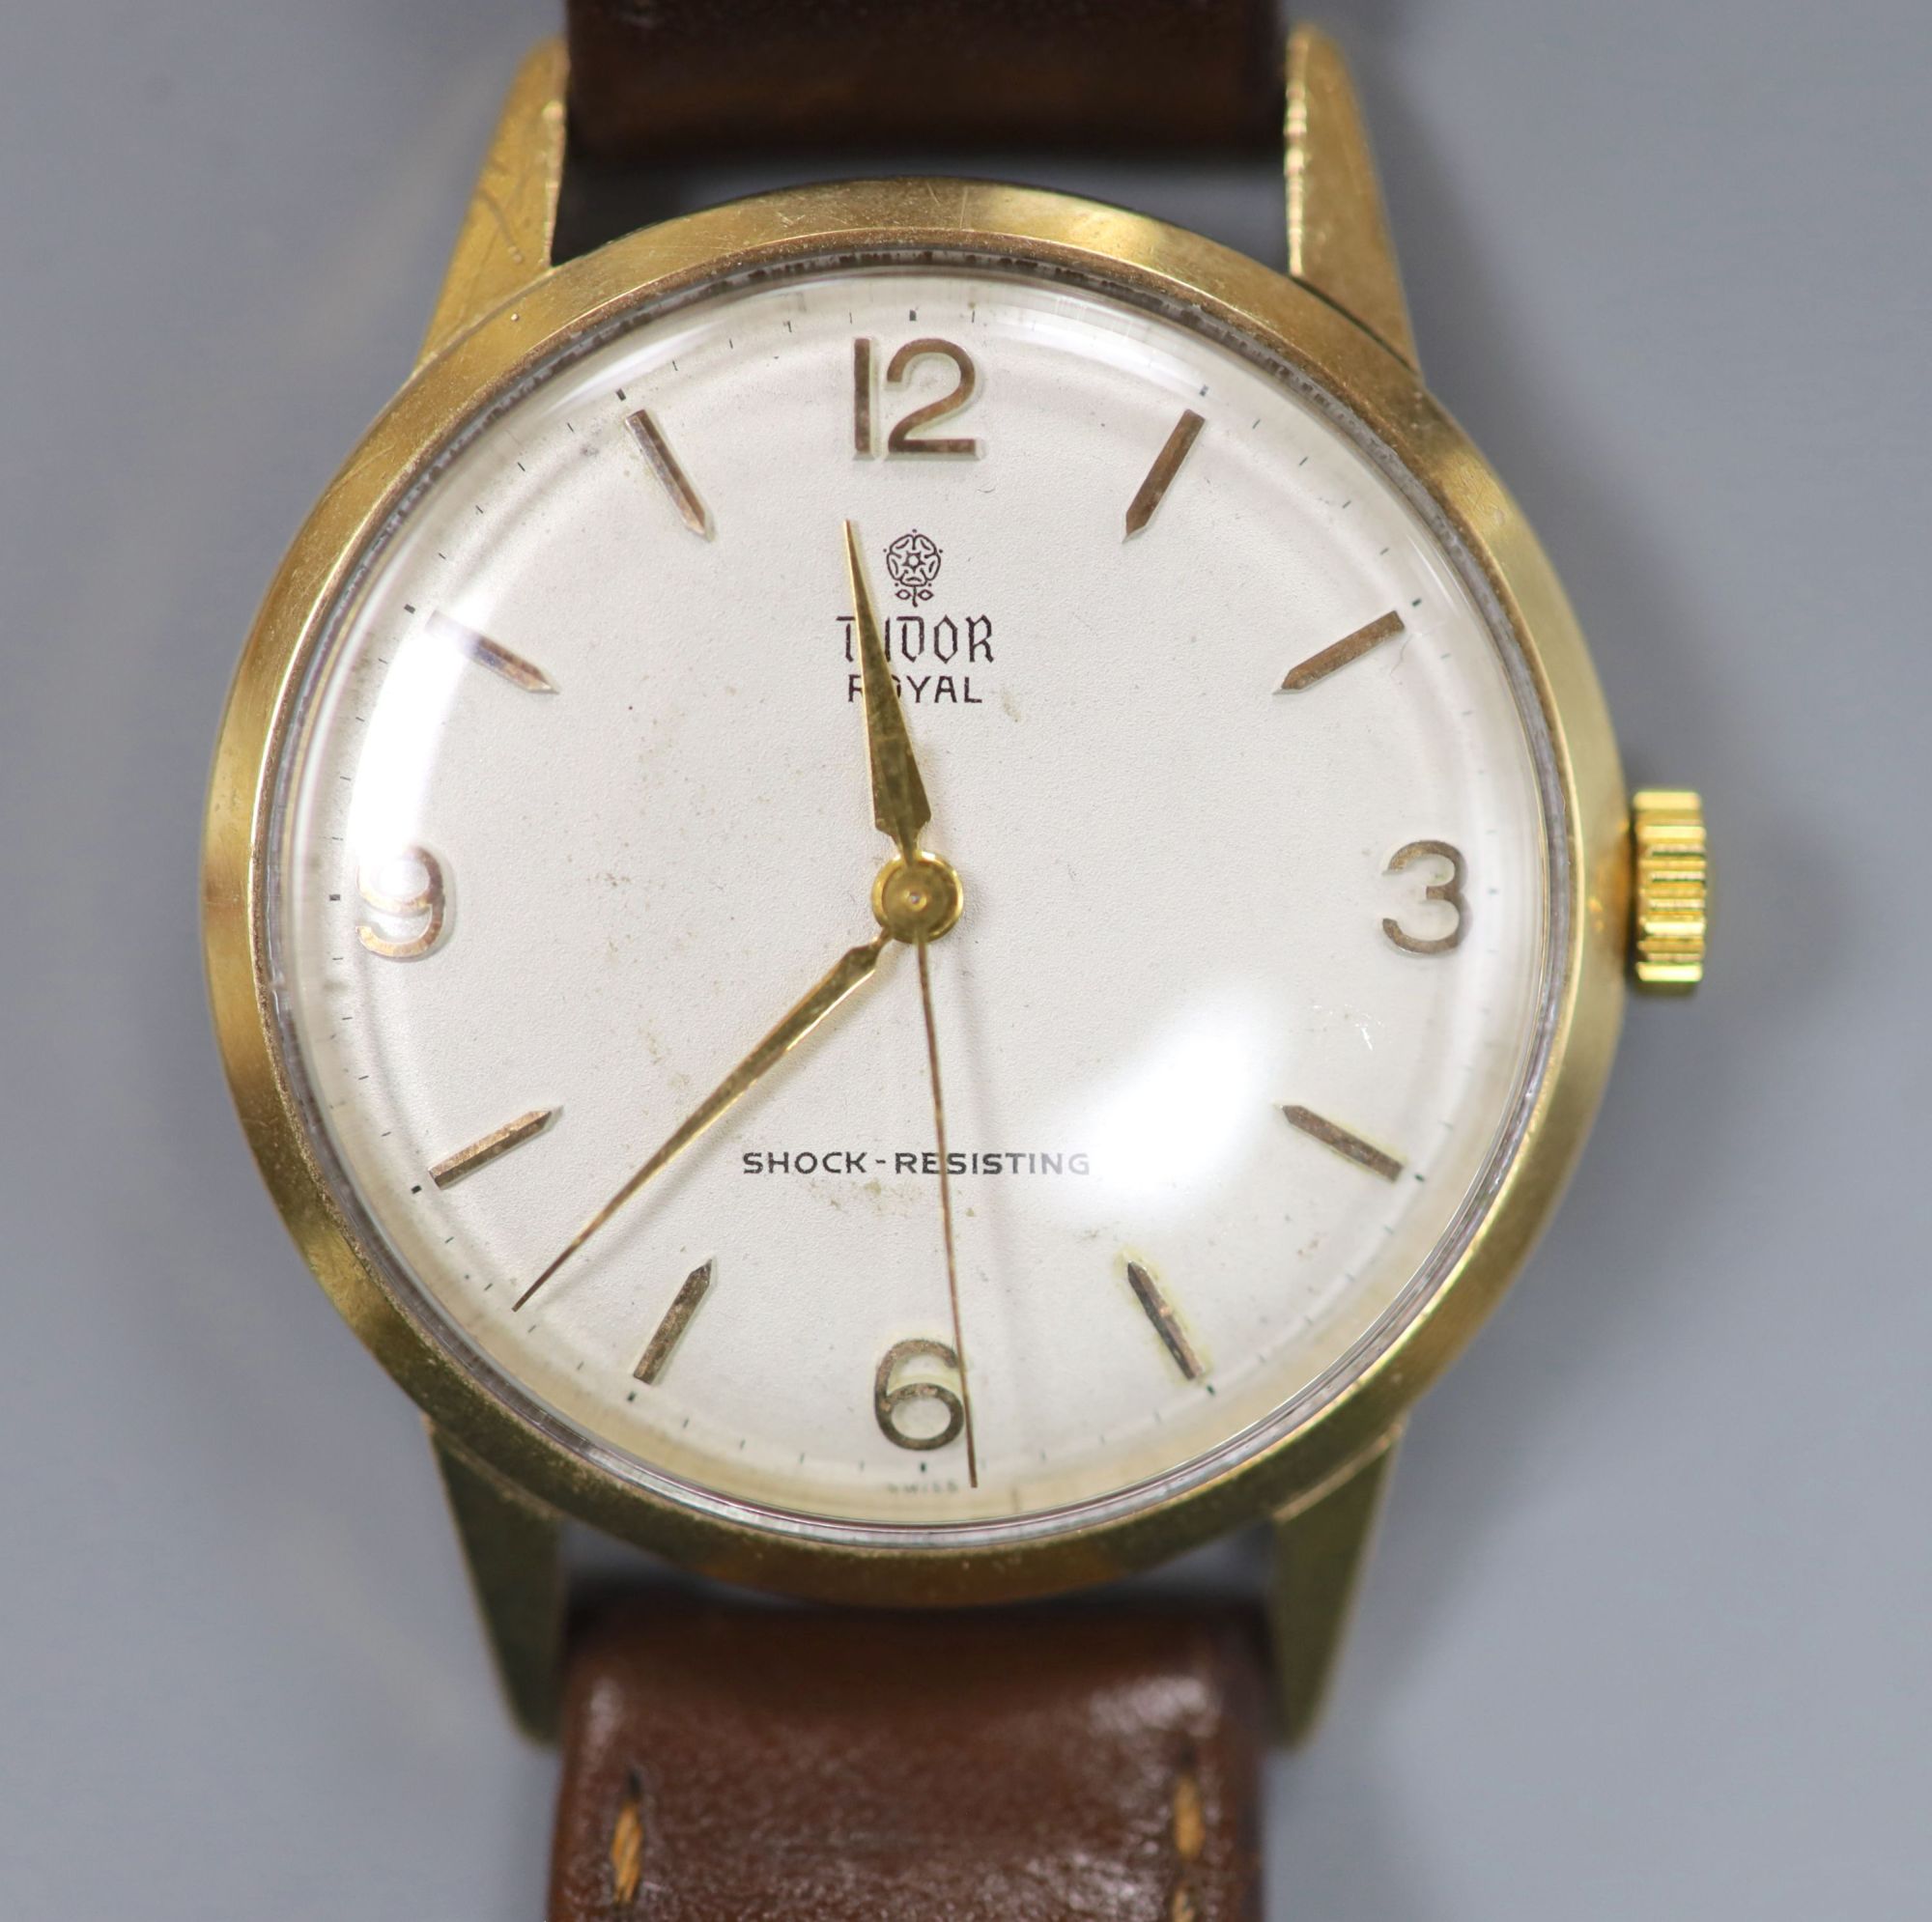 A gentlemans early 1960s 9ct gold Tudor Royal manual wind wrist watch, on associated leather strap,